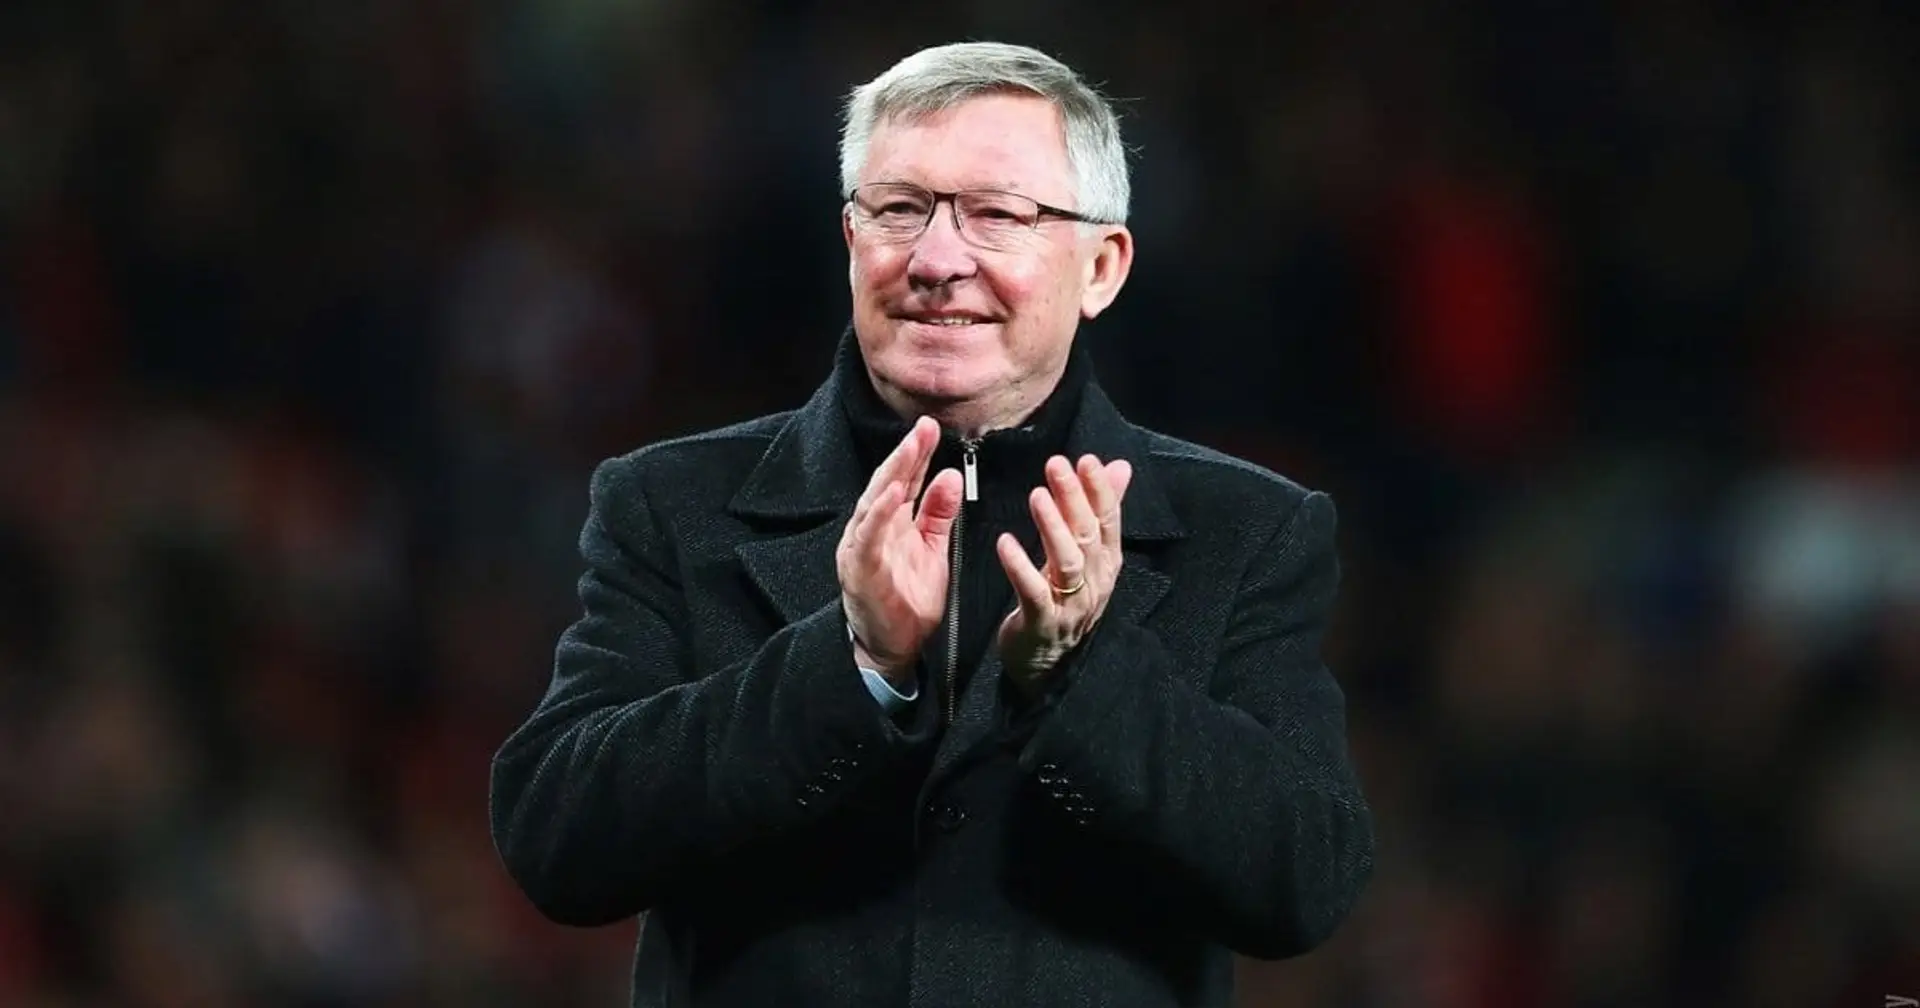 Sir Alex Ferguson: 'Looking at certain players, I could tell if they were Manchester United players'